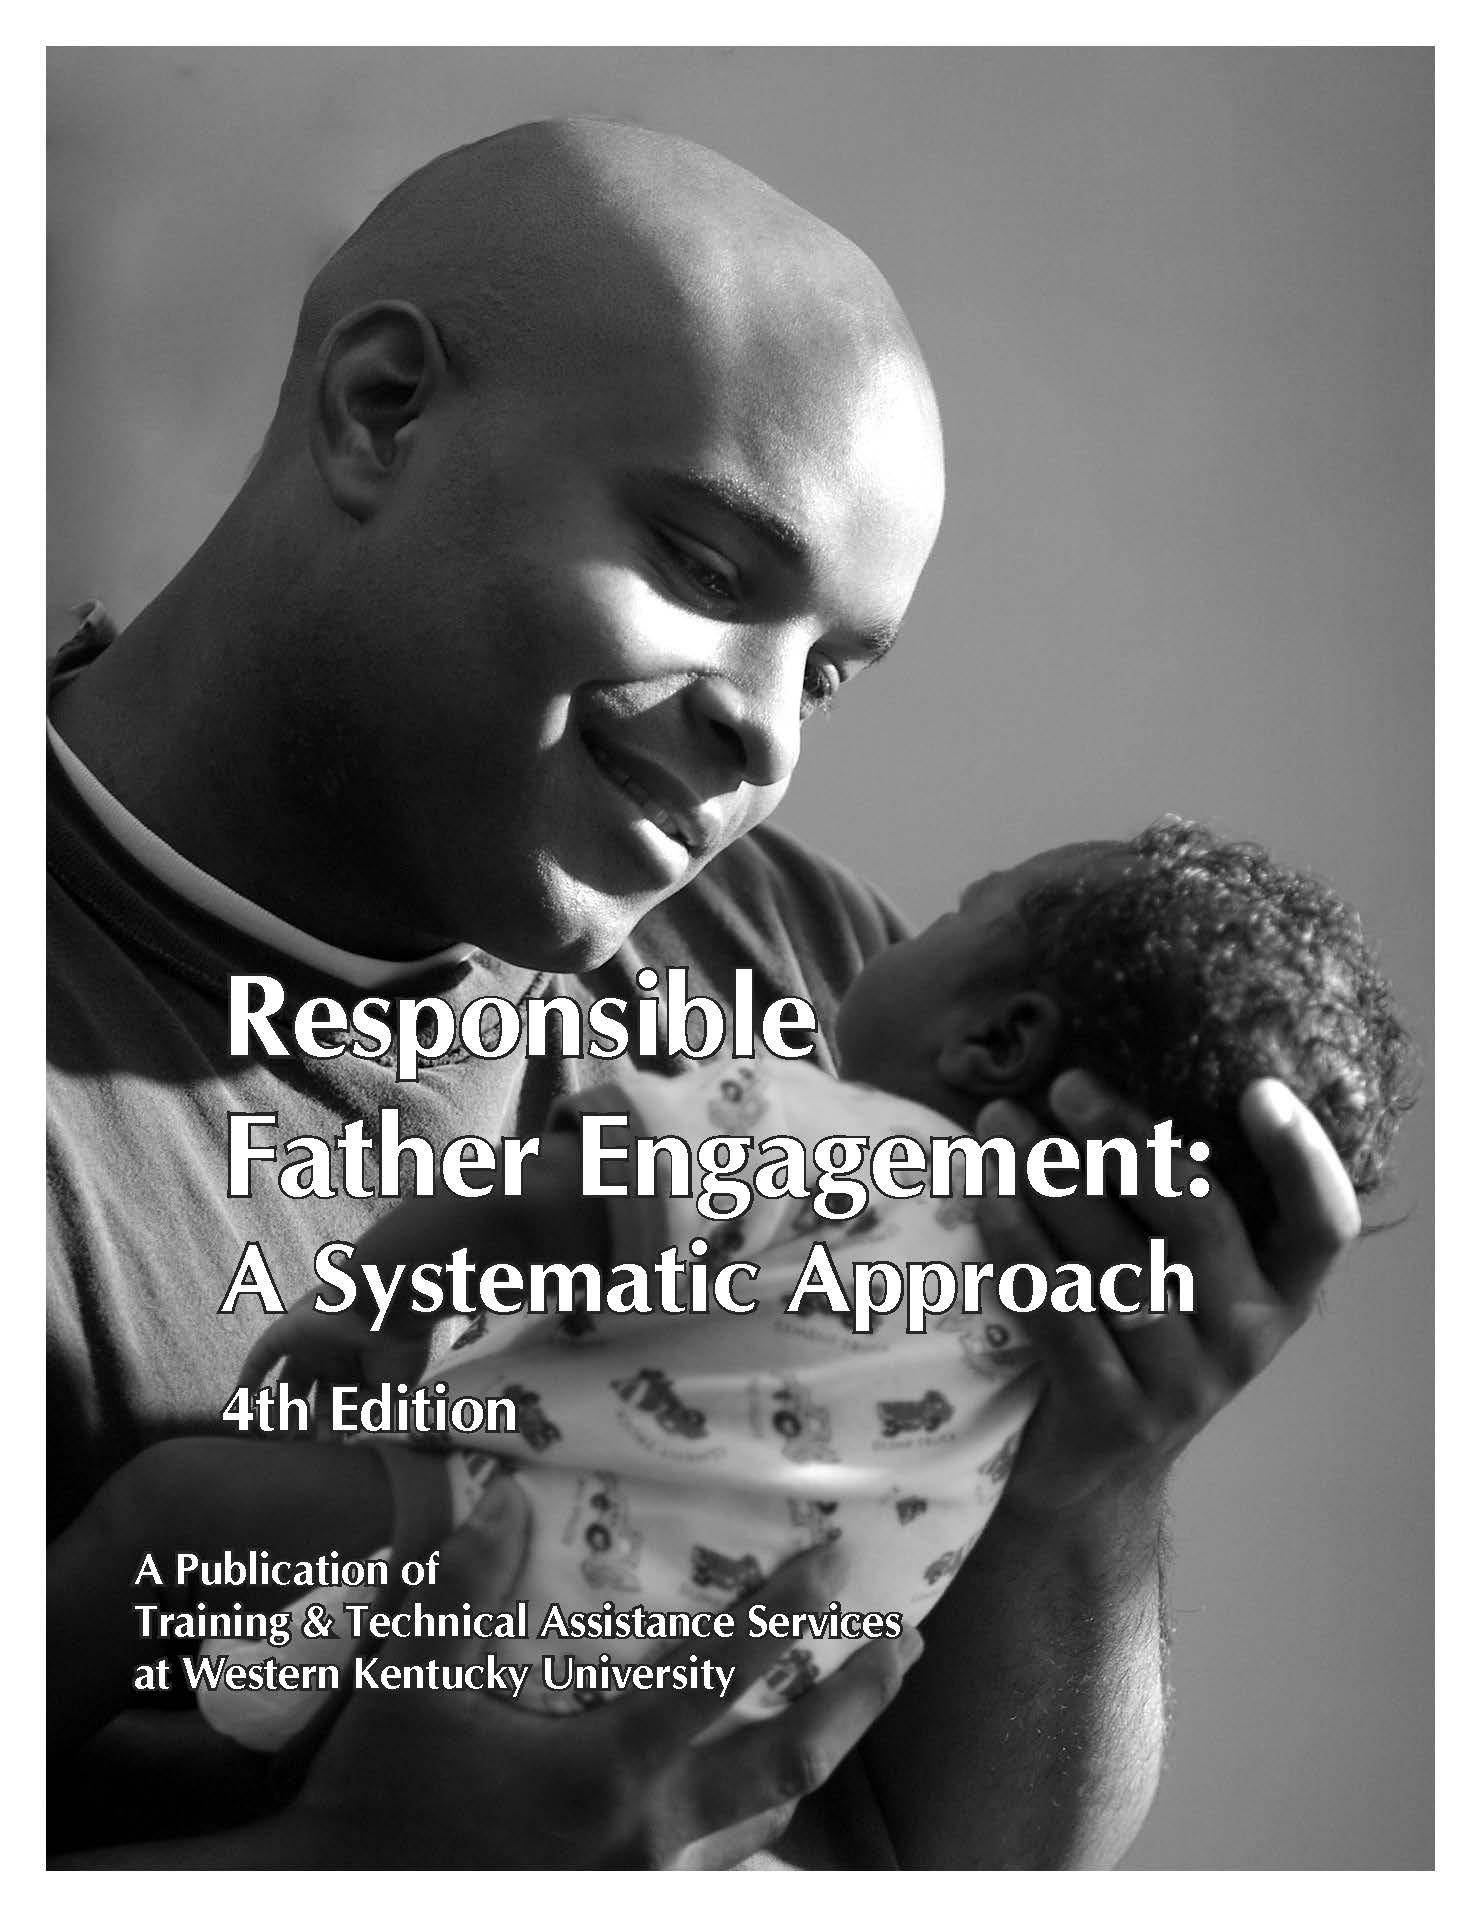 Responsible Father Engagement book cover